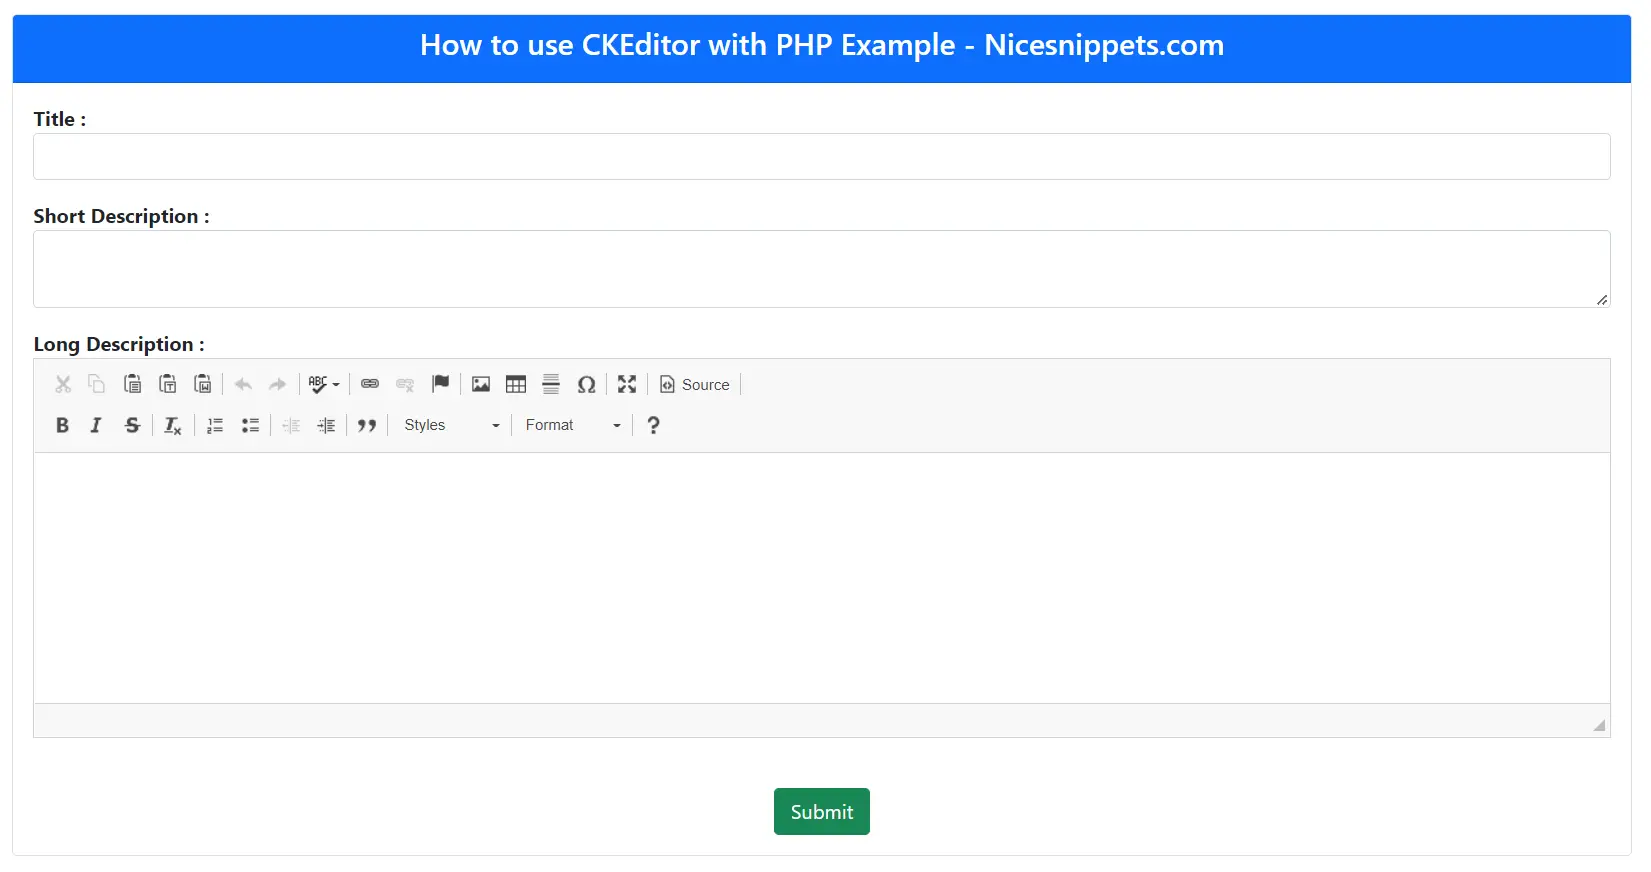 How to use CKEditor using PHP?